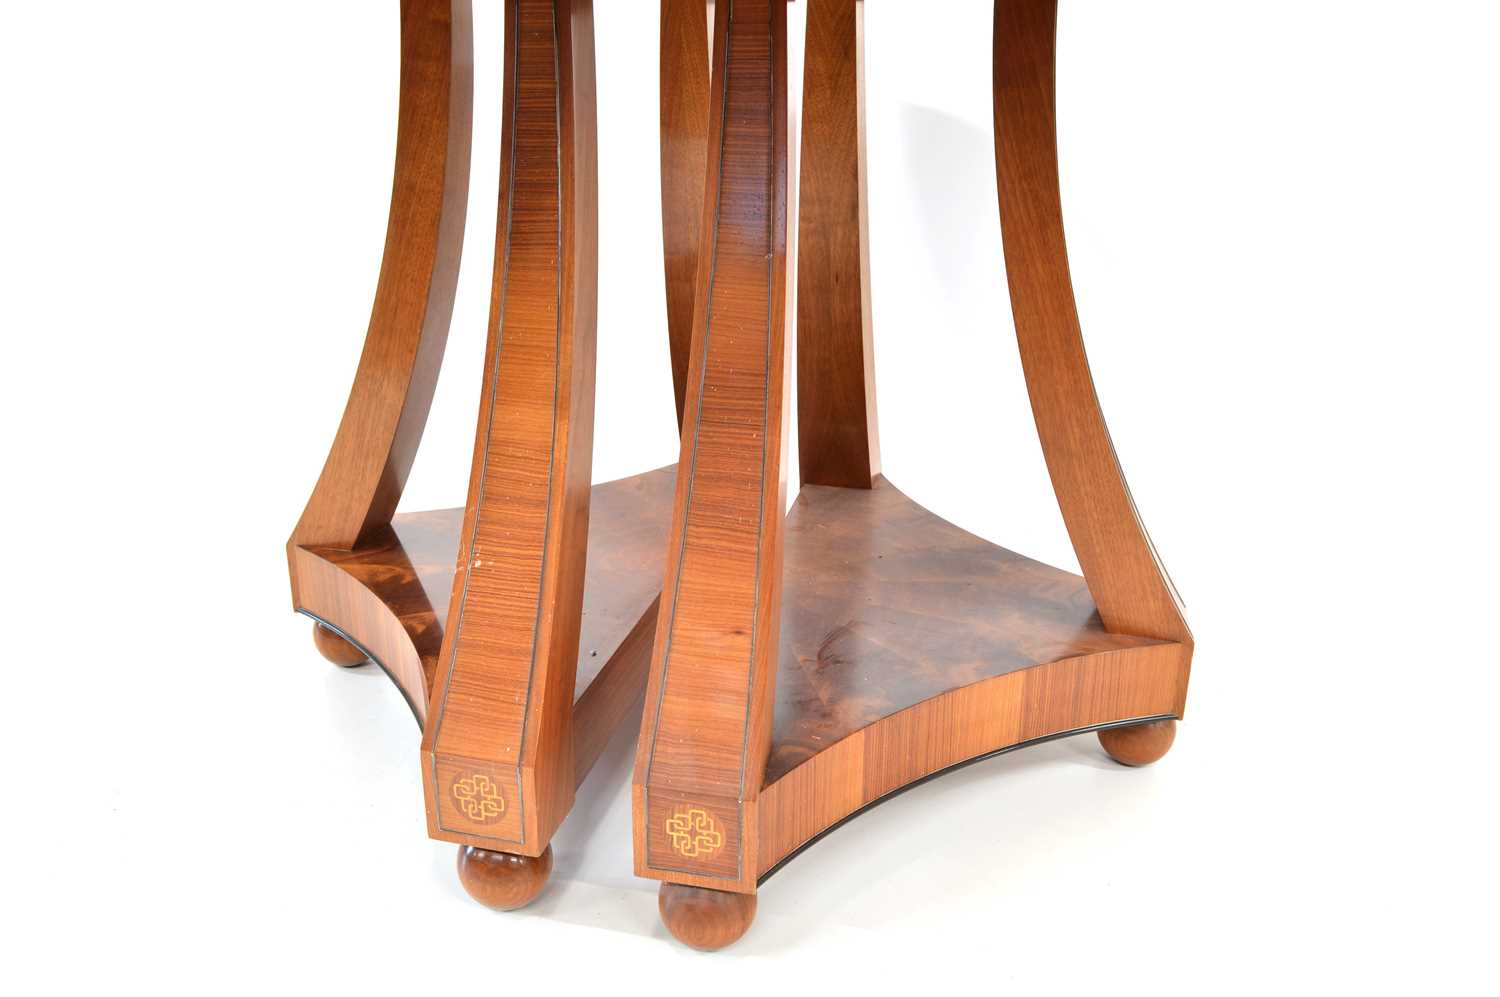 Pair of Mahogany side tables by Silver Linings workshop - Image 8 of 9